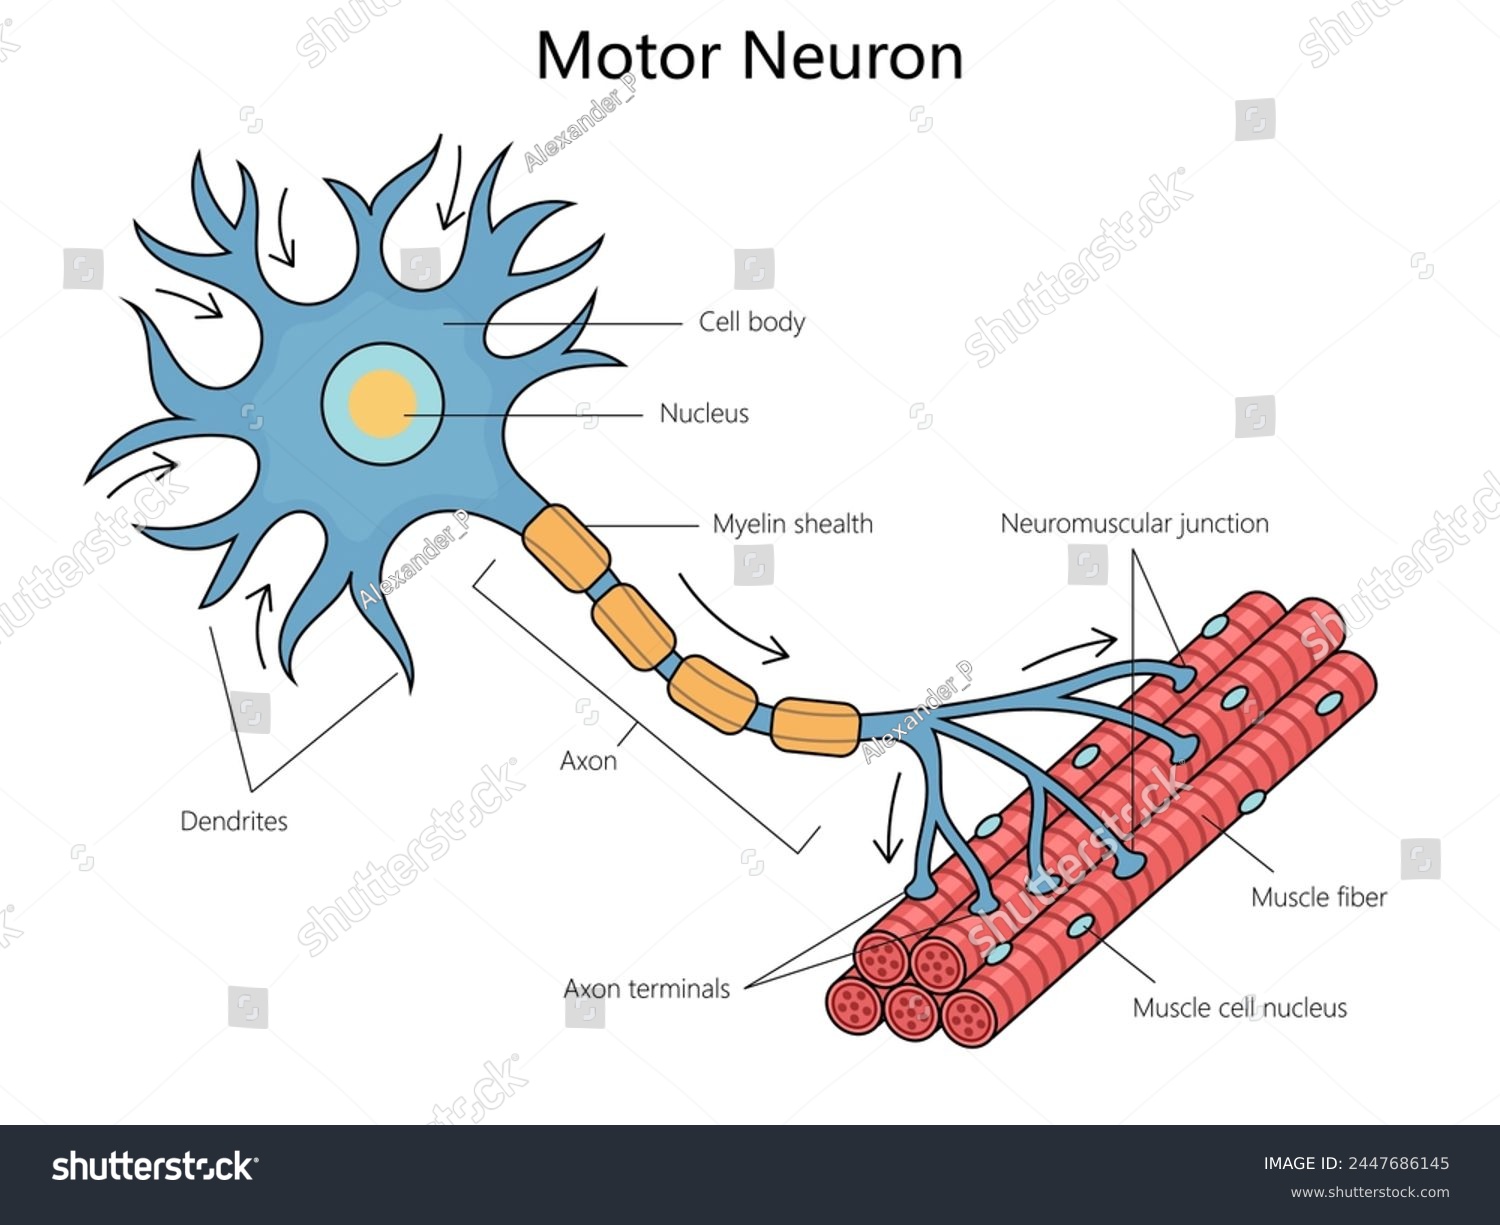 SVG of Human anatomy of a motor neuron, including its parts like the axon and dendrites structure diagram hand drawn schematic vector illustration. Medical science educational illustration svg